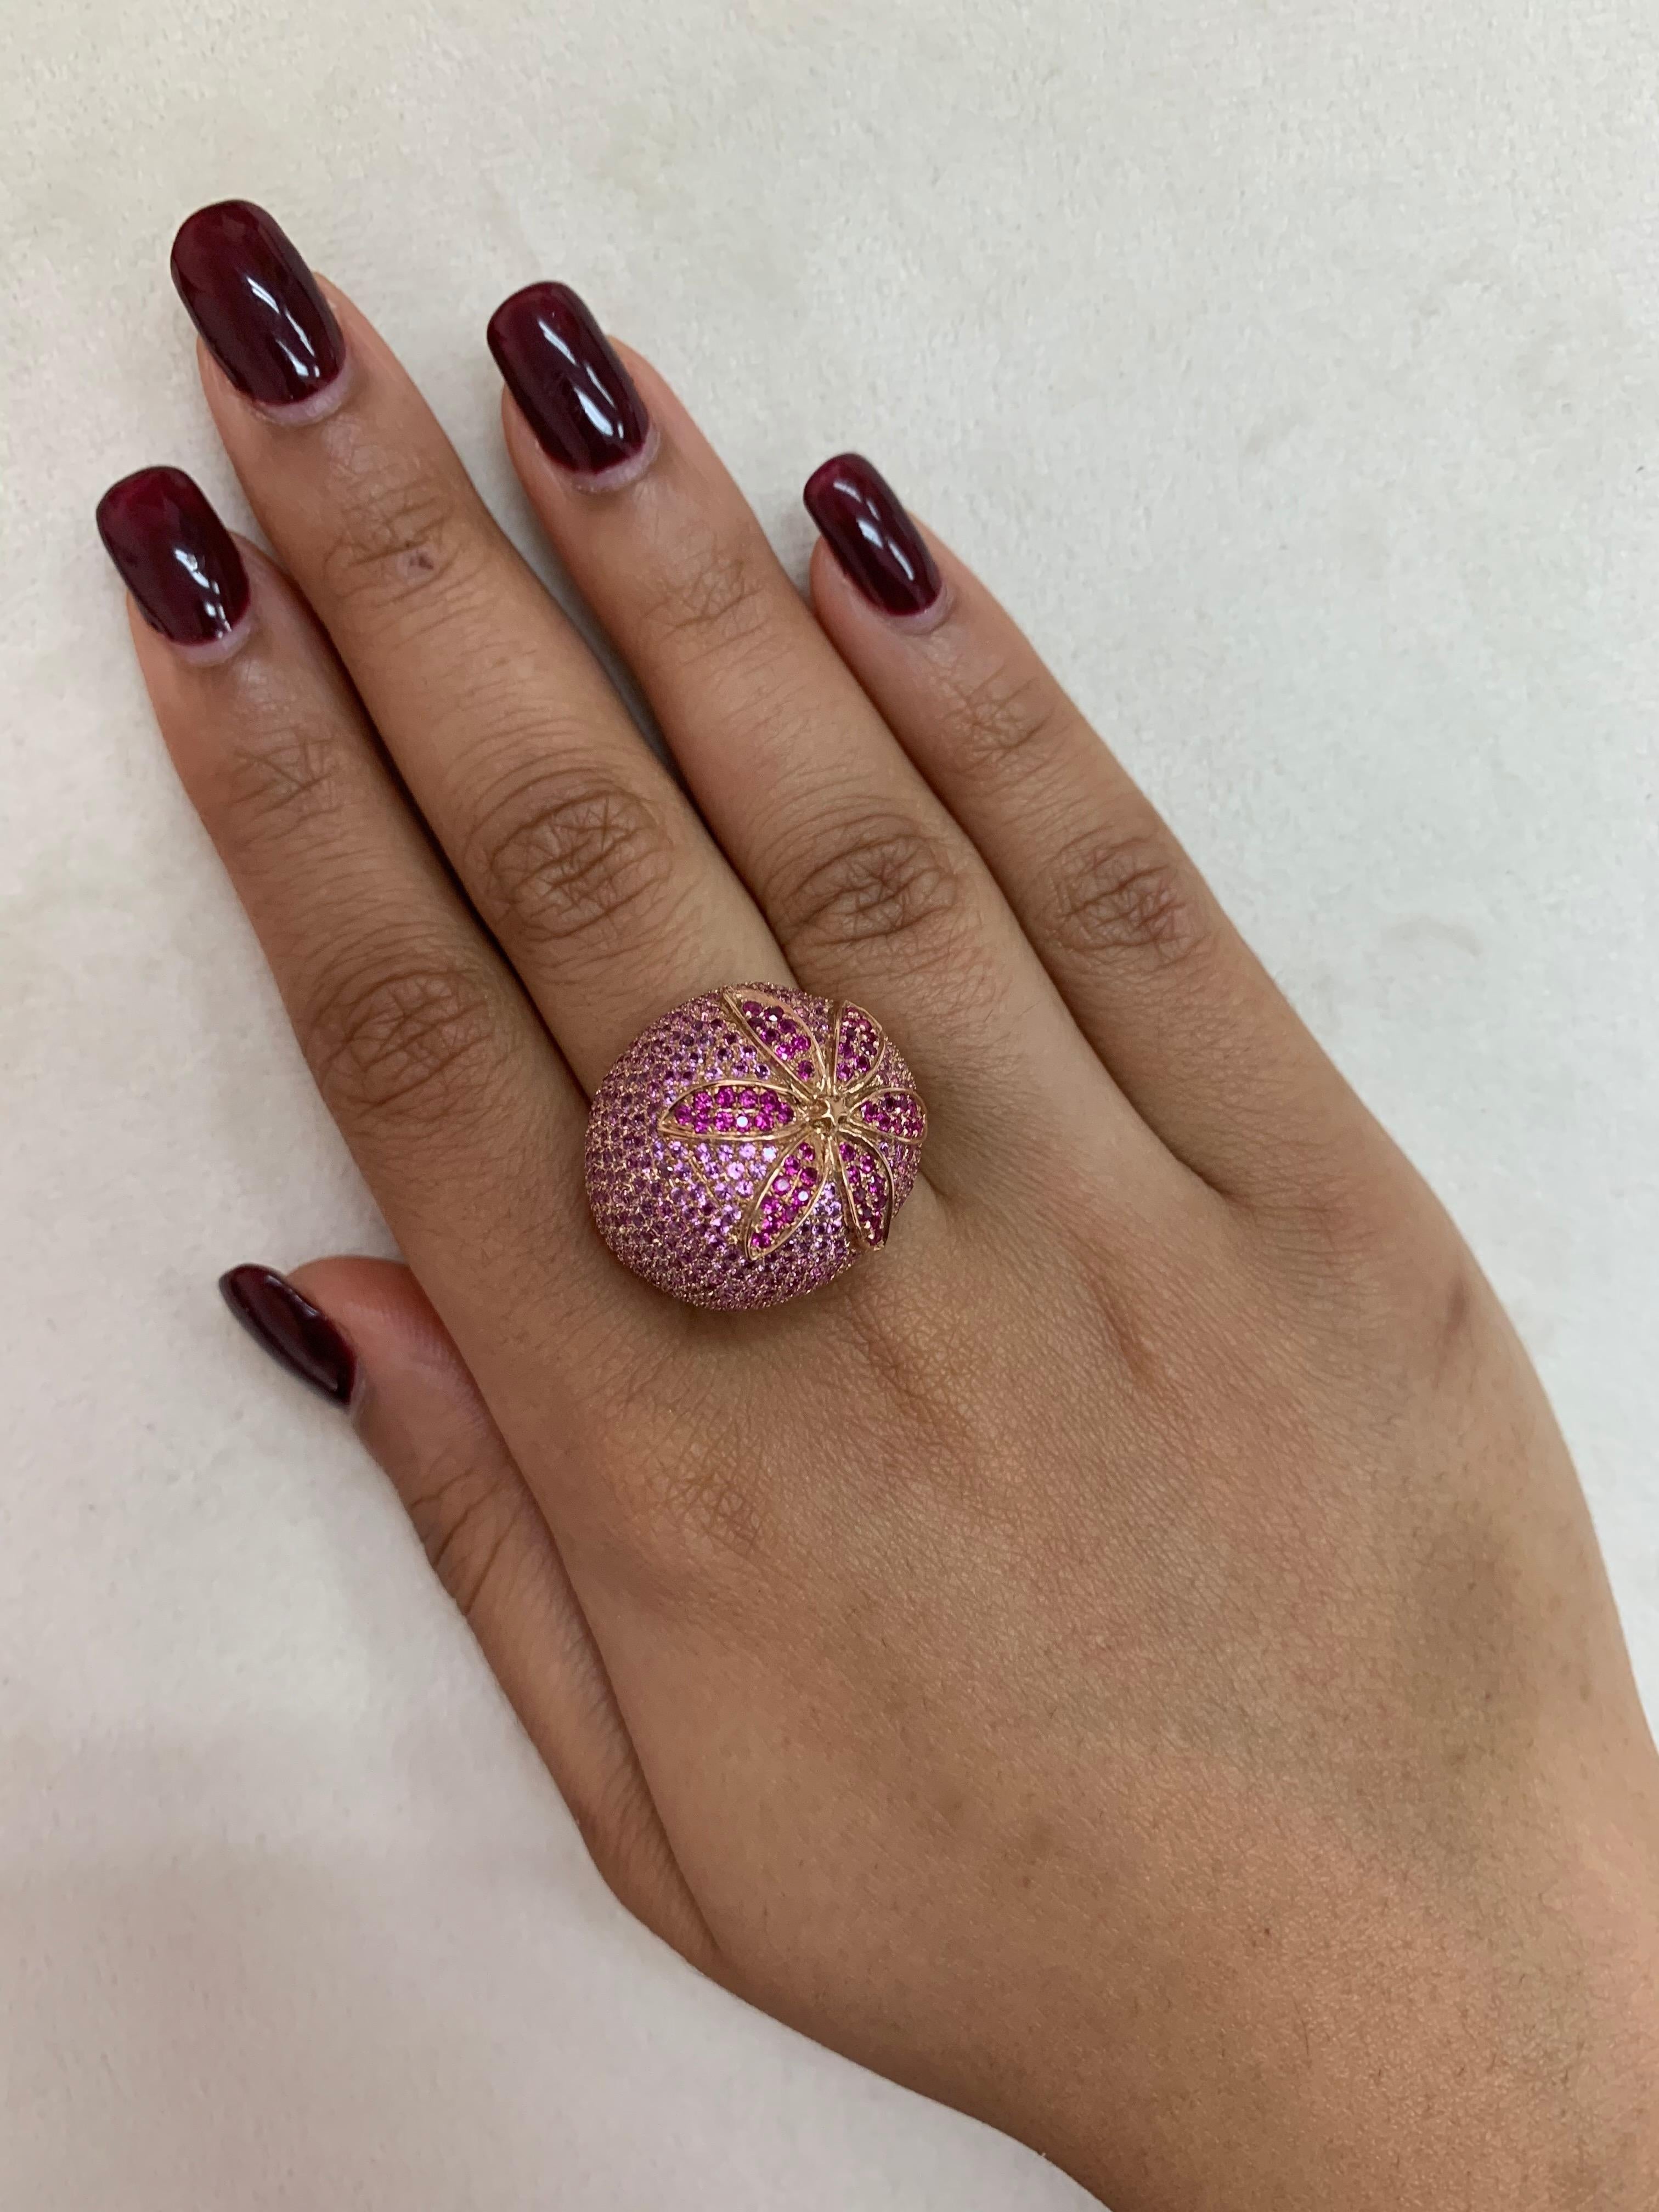 Glamorous Gemstones - Sunita Nahata started off her career as a gemstone trader, and this particular collection reflects her love for multi-colored semi-precious gemstones. This ring presents a floral ruby set on a cluster of pink sapphires. These